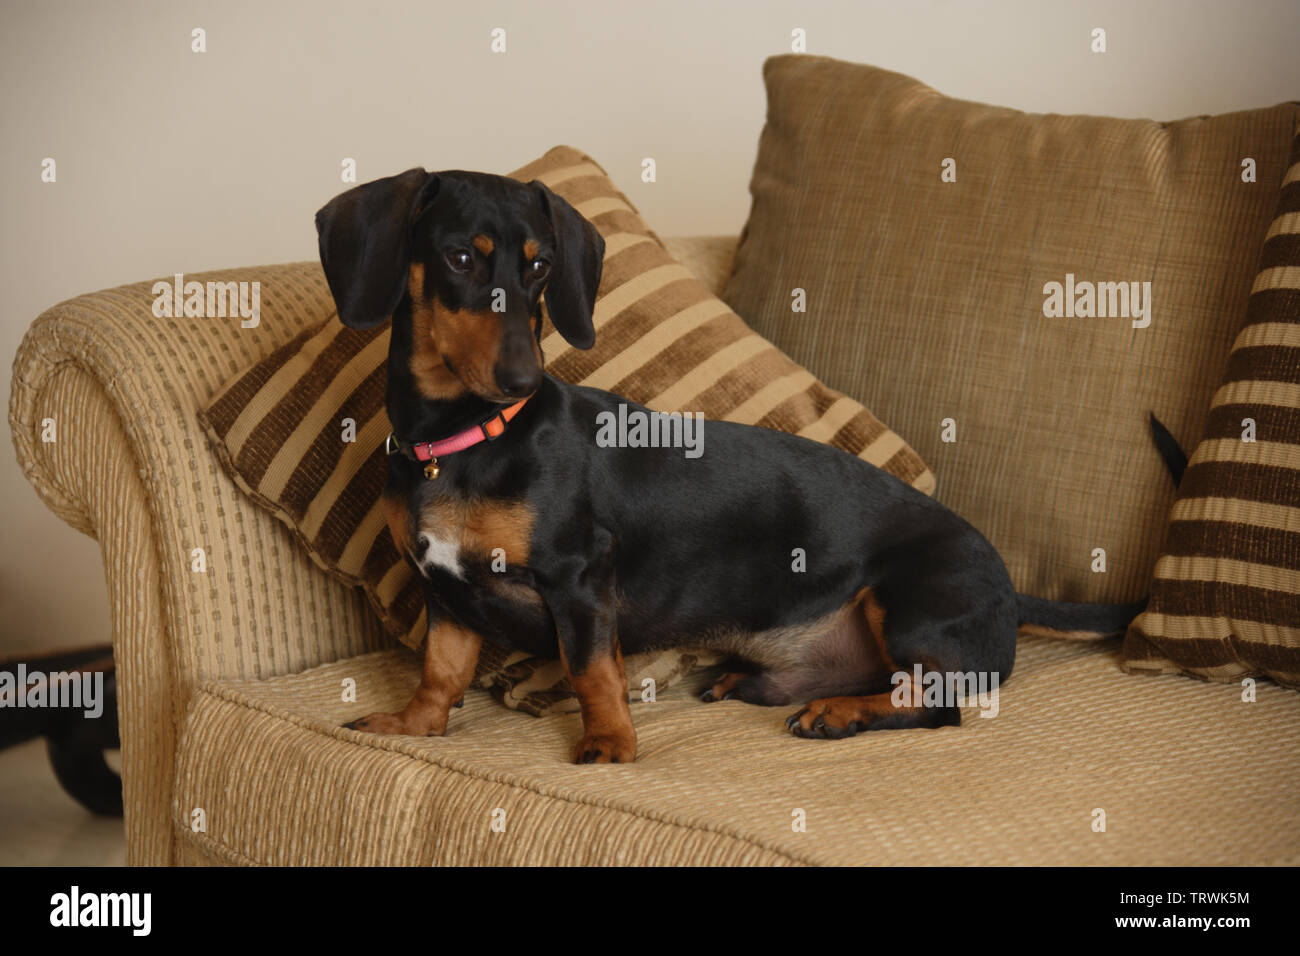 Dachshund sitting on a couch Stock Photo